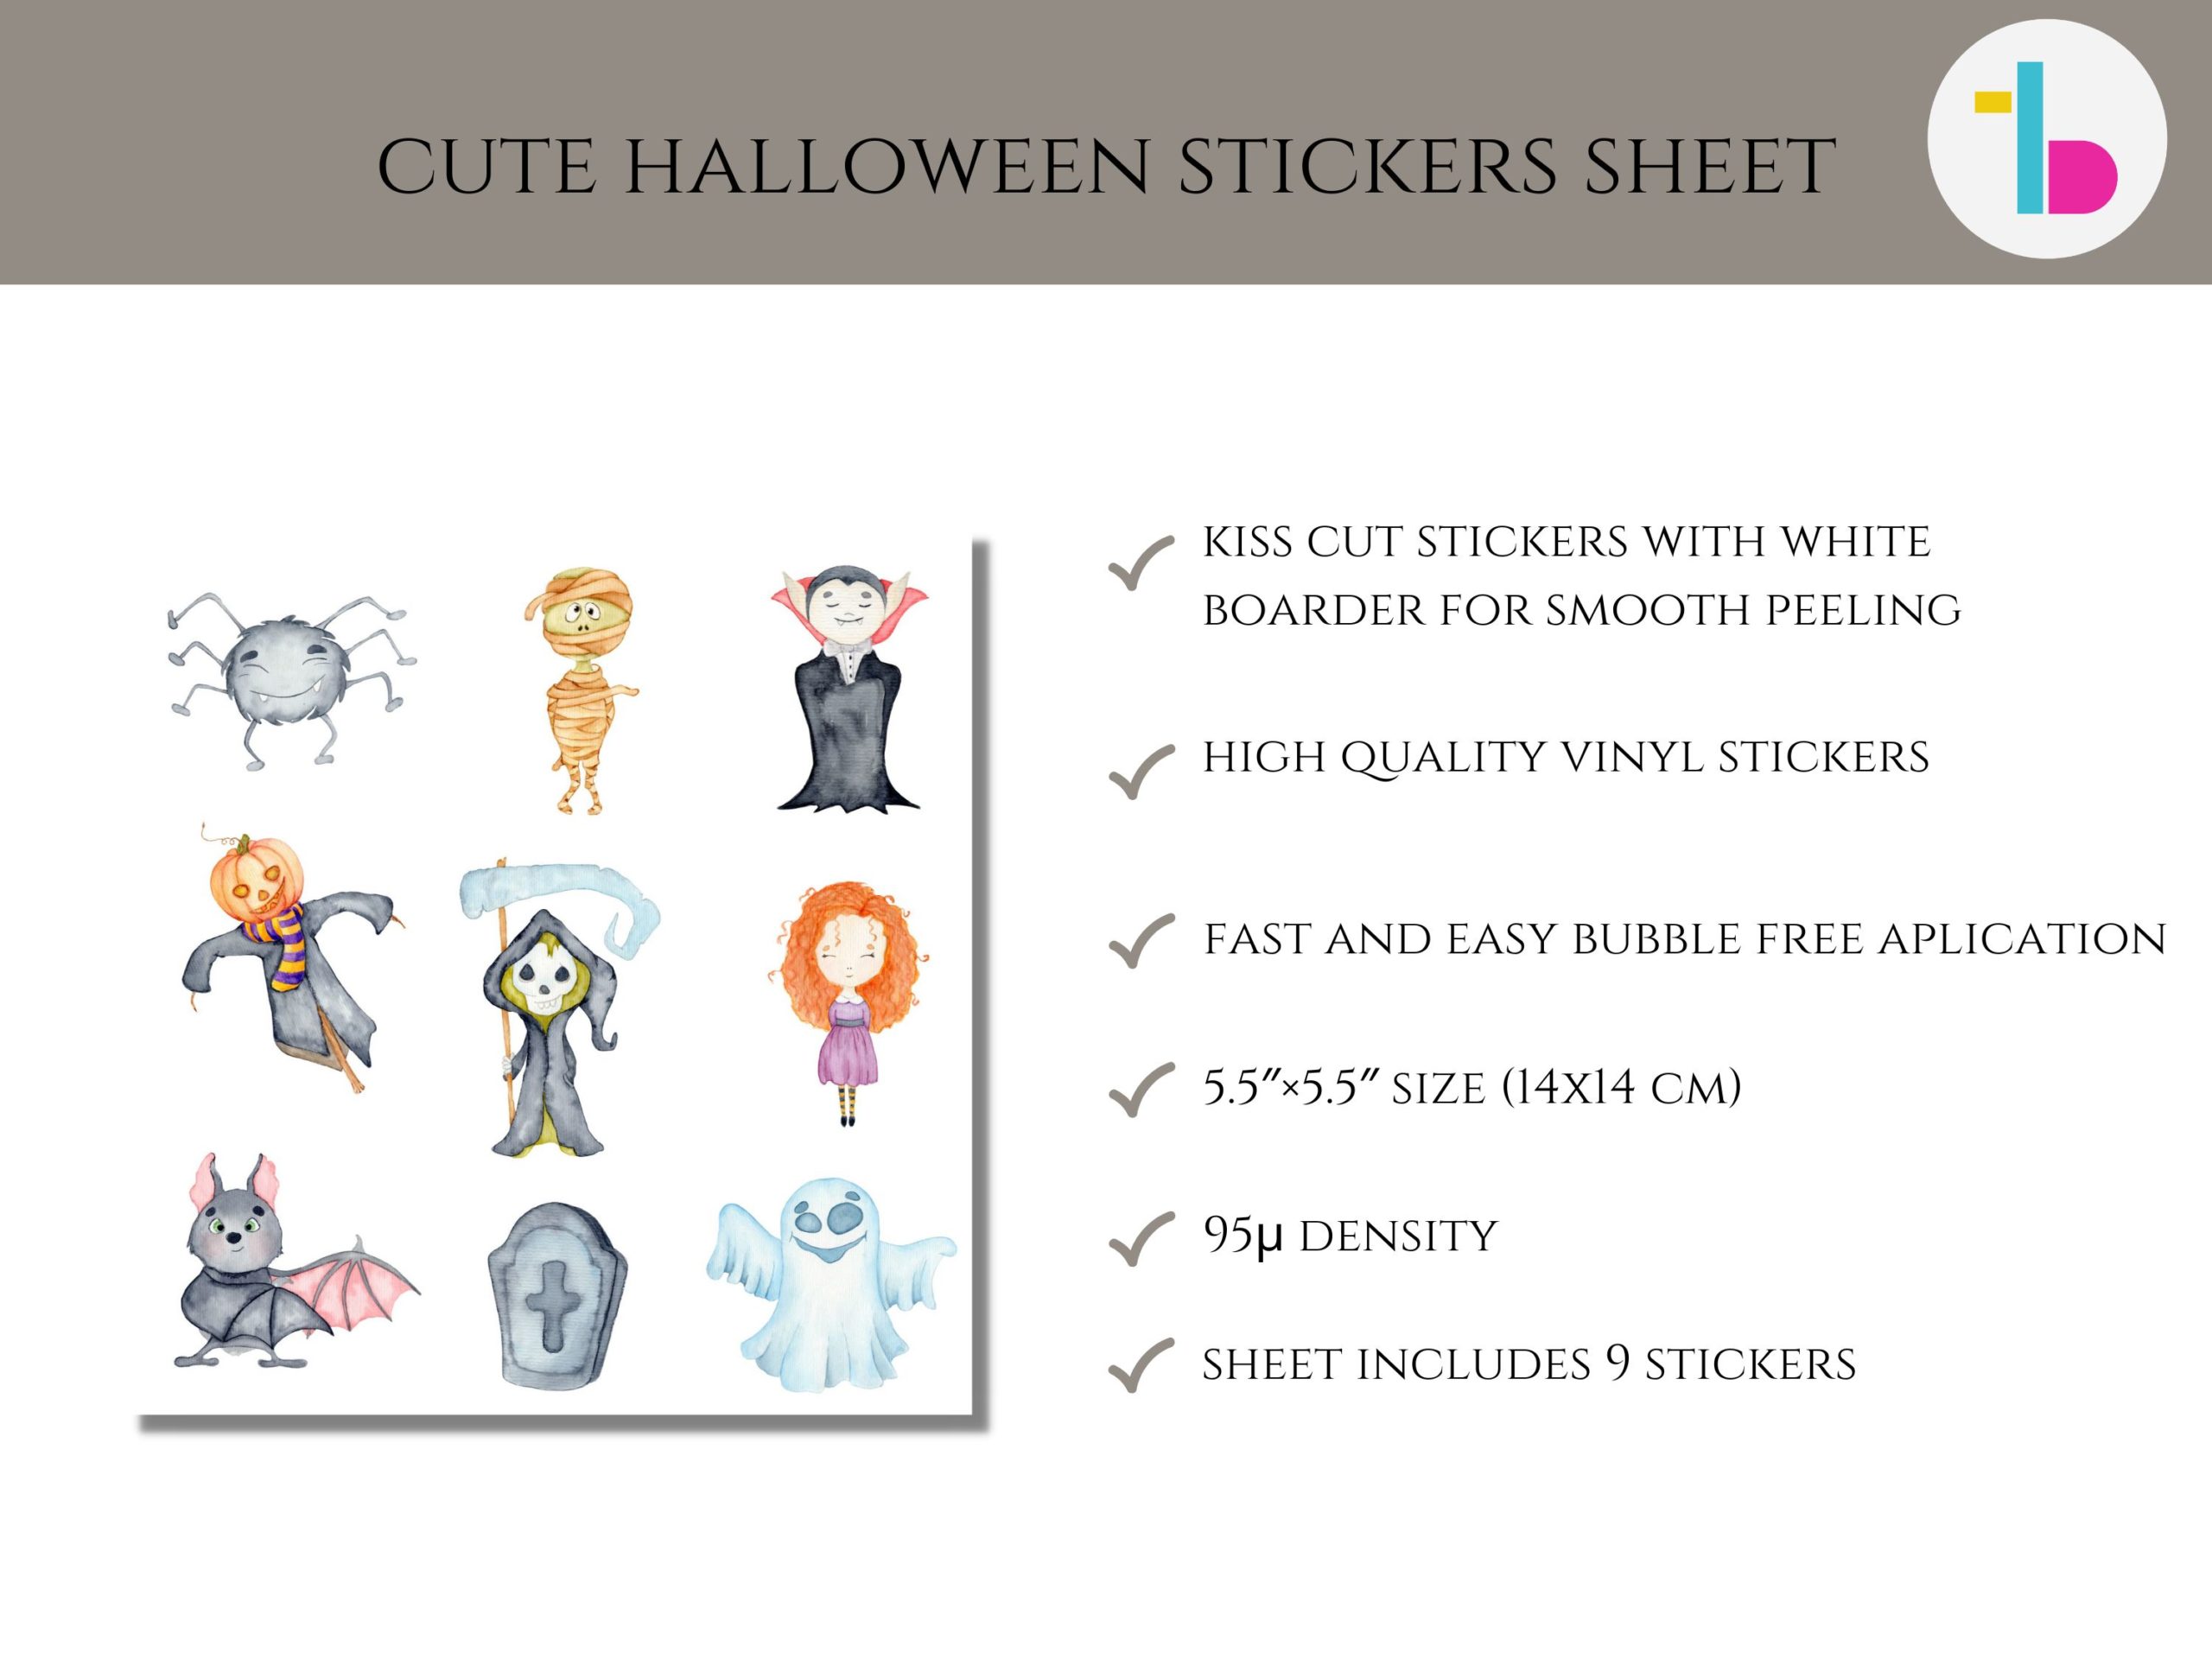 Cute Halloween stickers for kids